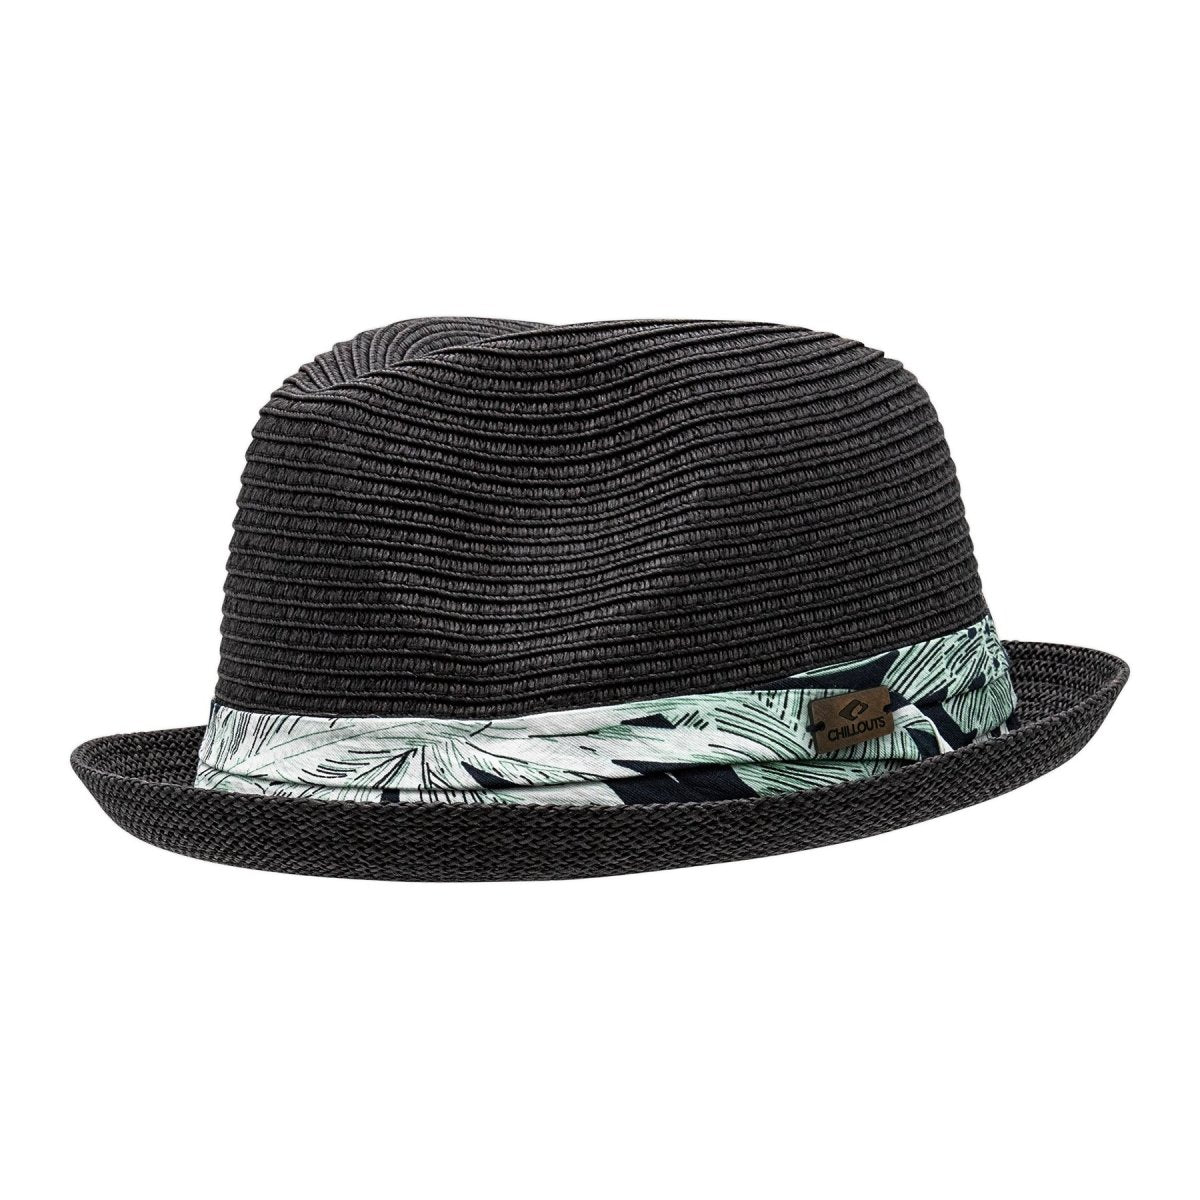 Pork pie with a patterned hat band for men - buy online now – Chillouts  Headwear